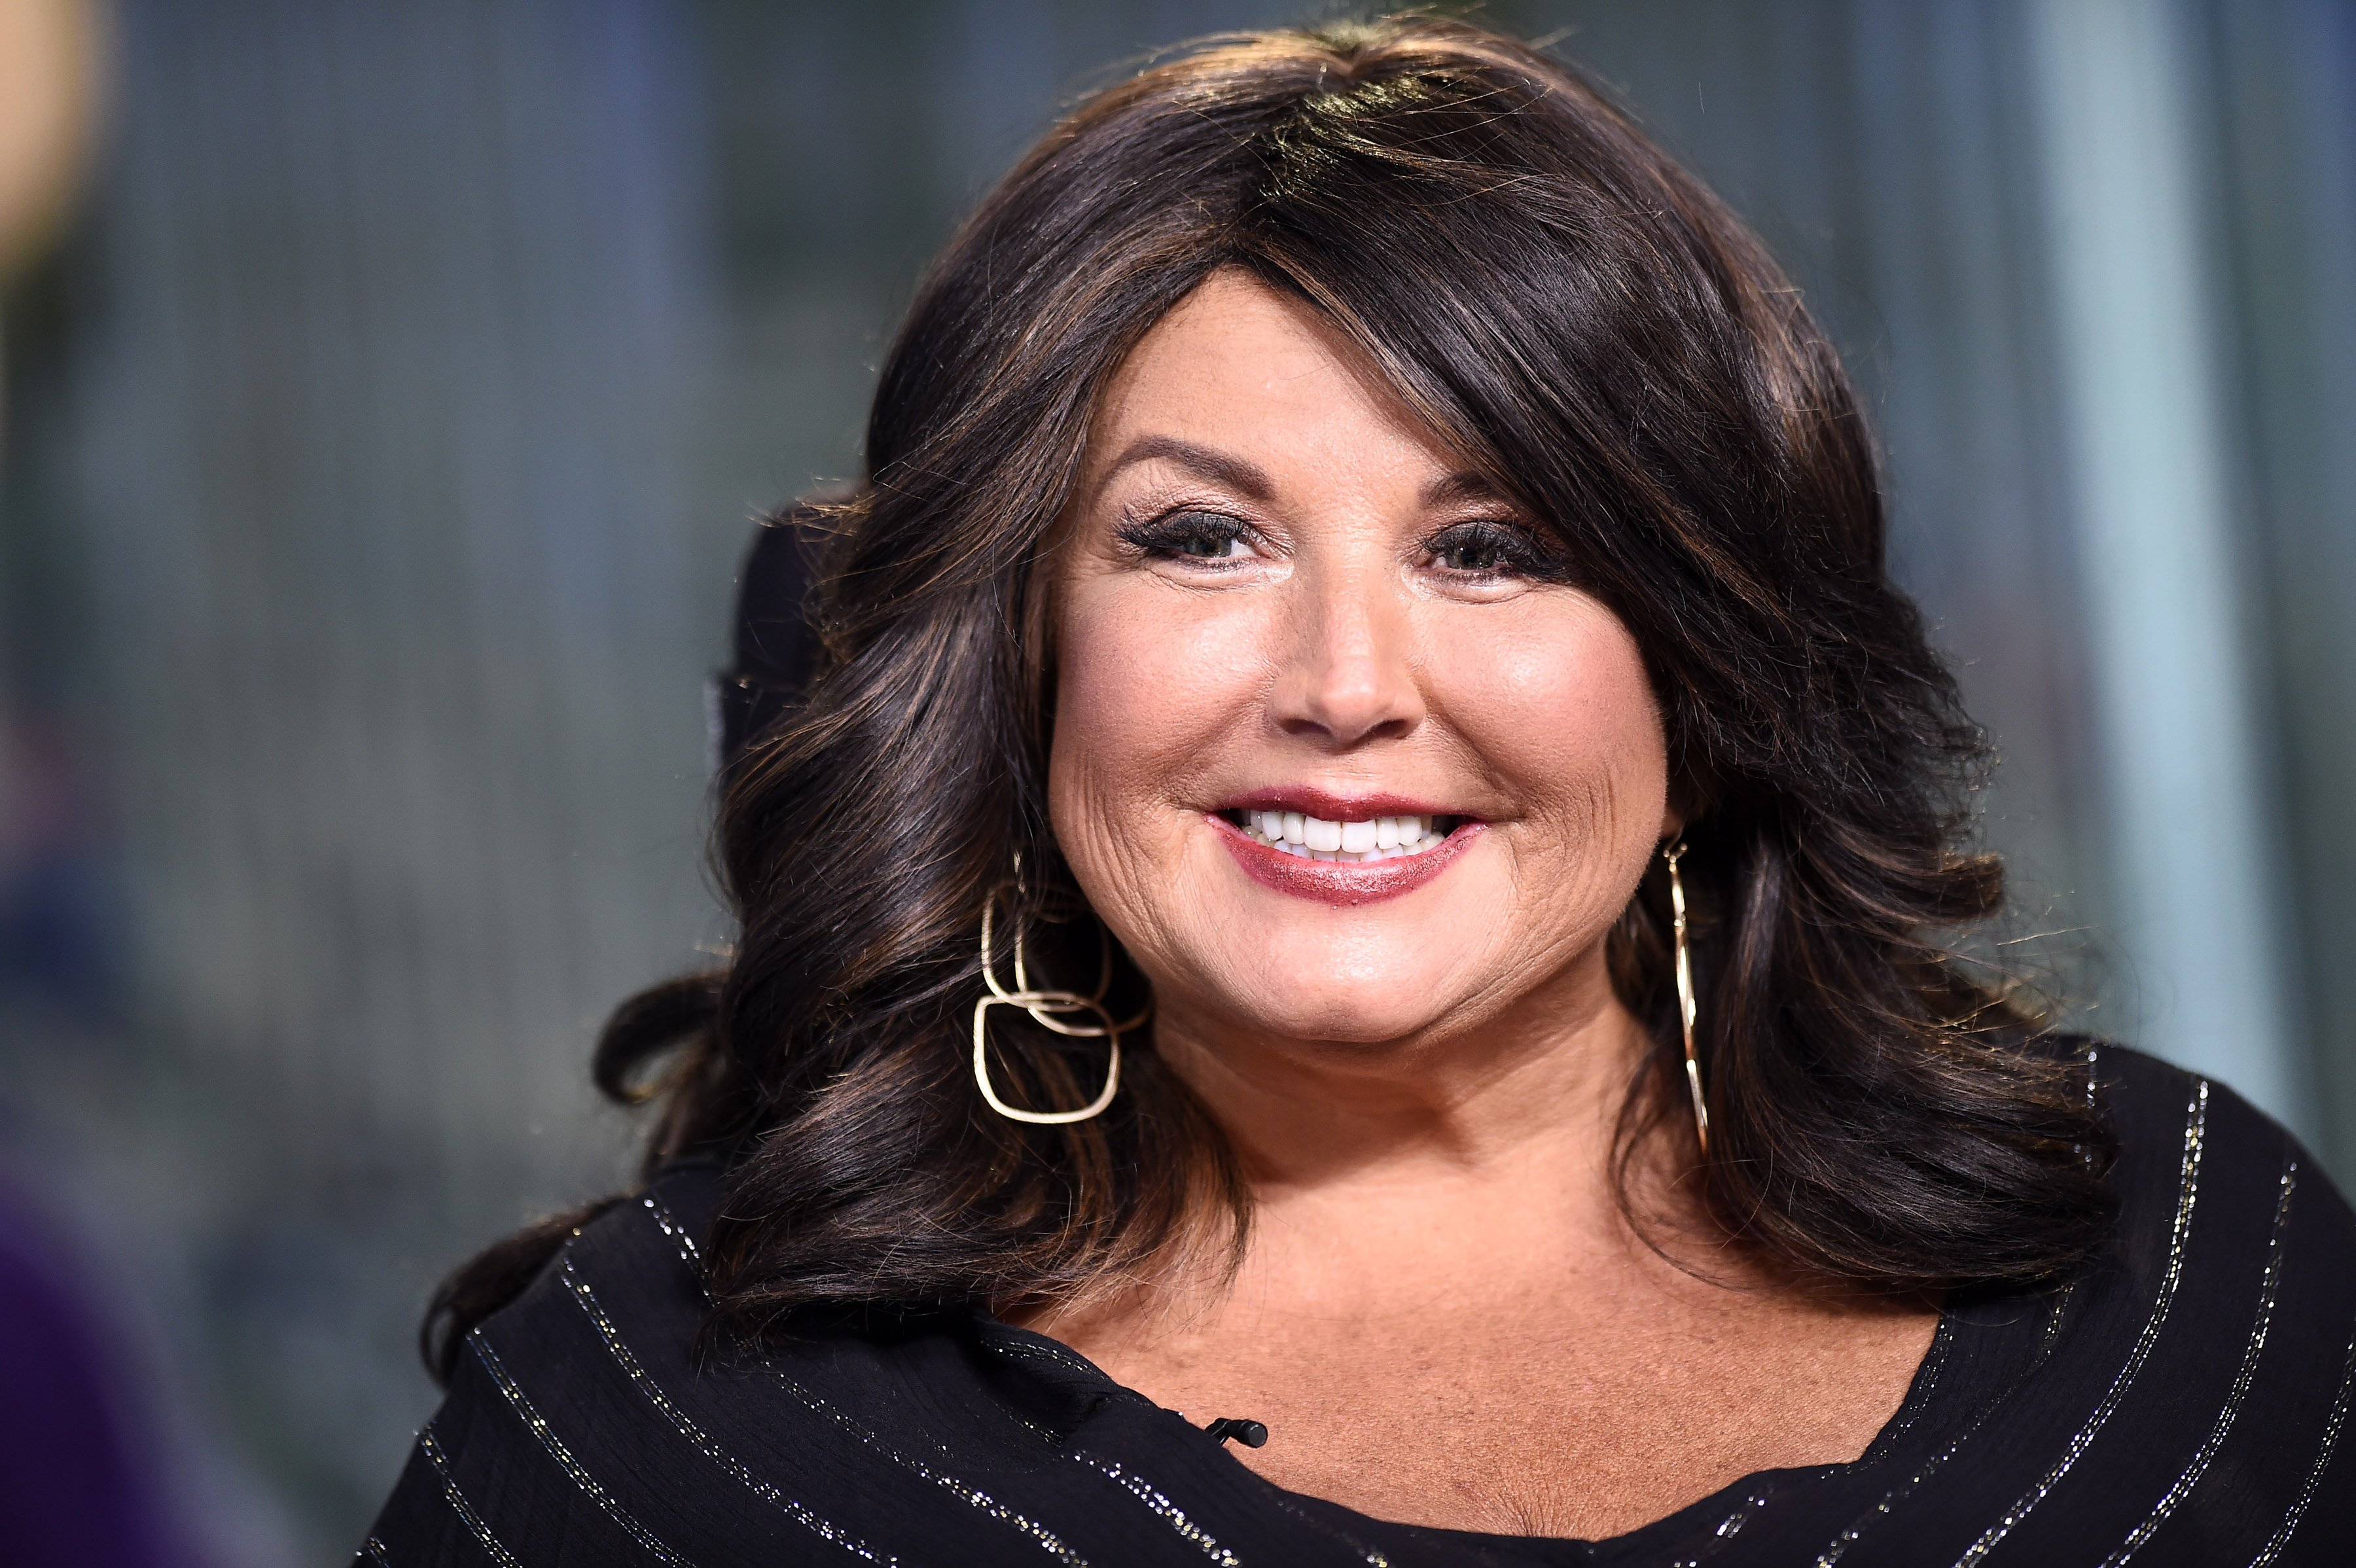 Abby Lee Miller visits the set of 'The Claman Countdown' at Fox Business Network Studios on July 10, 2019 in New York City | Photo: Getty Images